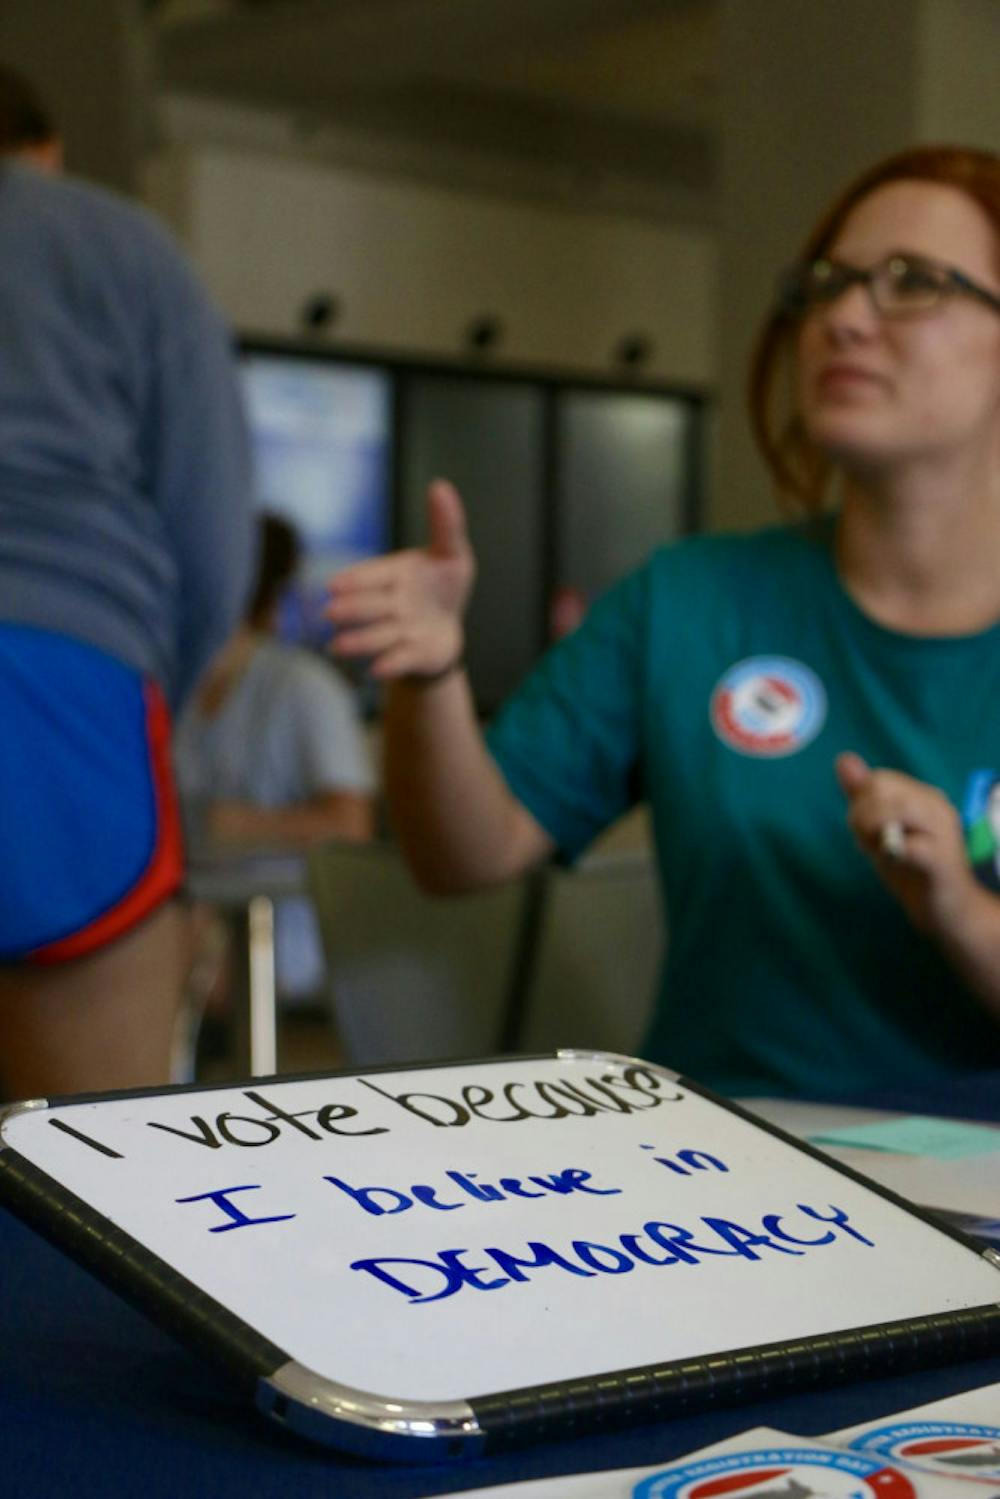 <p>Megan Newsome, a 21-year-old UF astrophysics senior, gives instructions to other students in Pugh Hall as they register to vote.</p>
<p><span>&nbsp;</span></p>